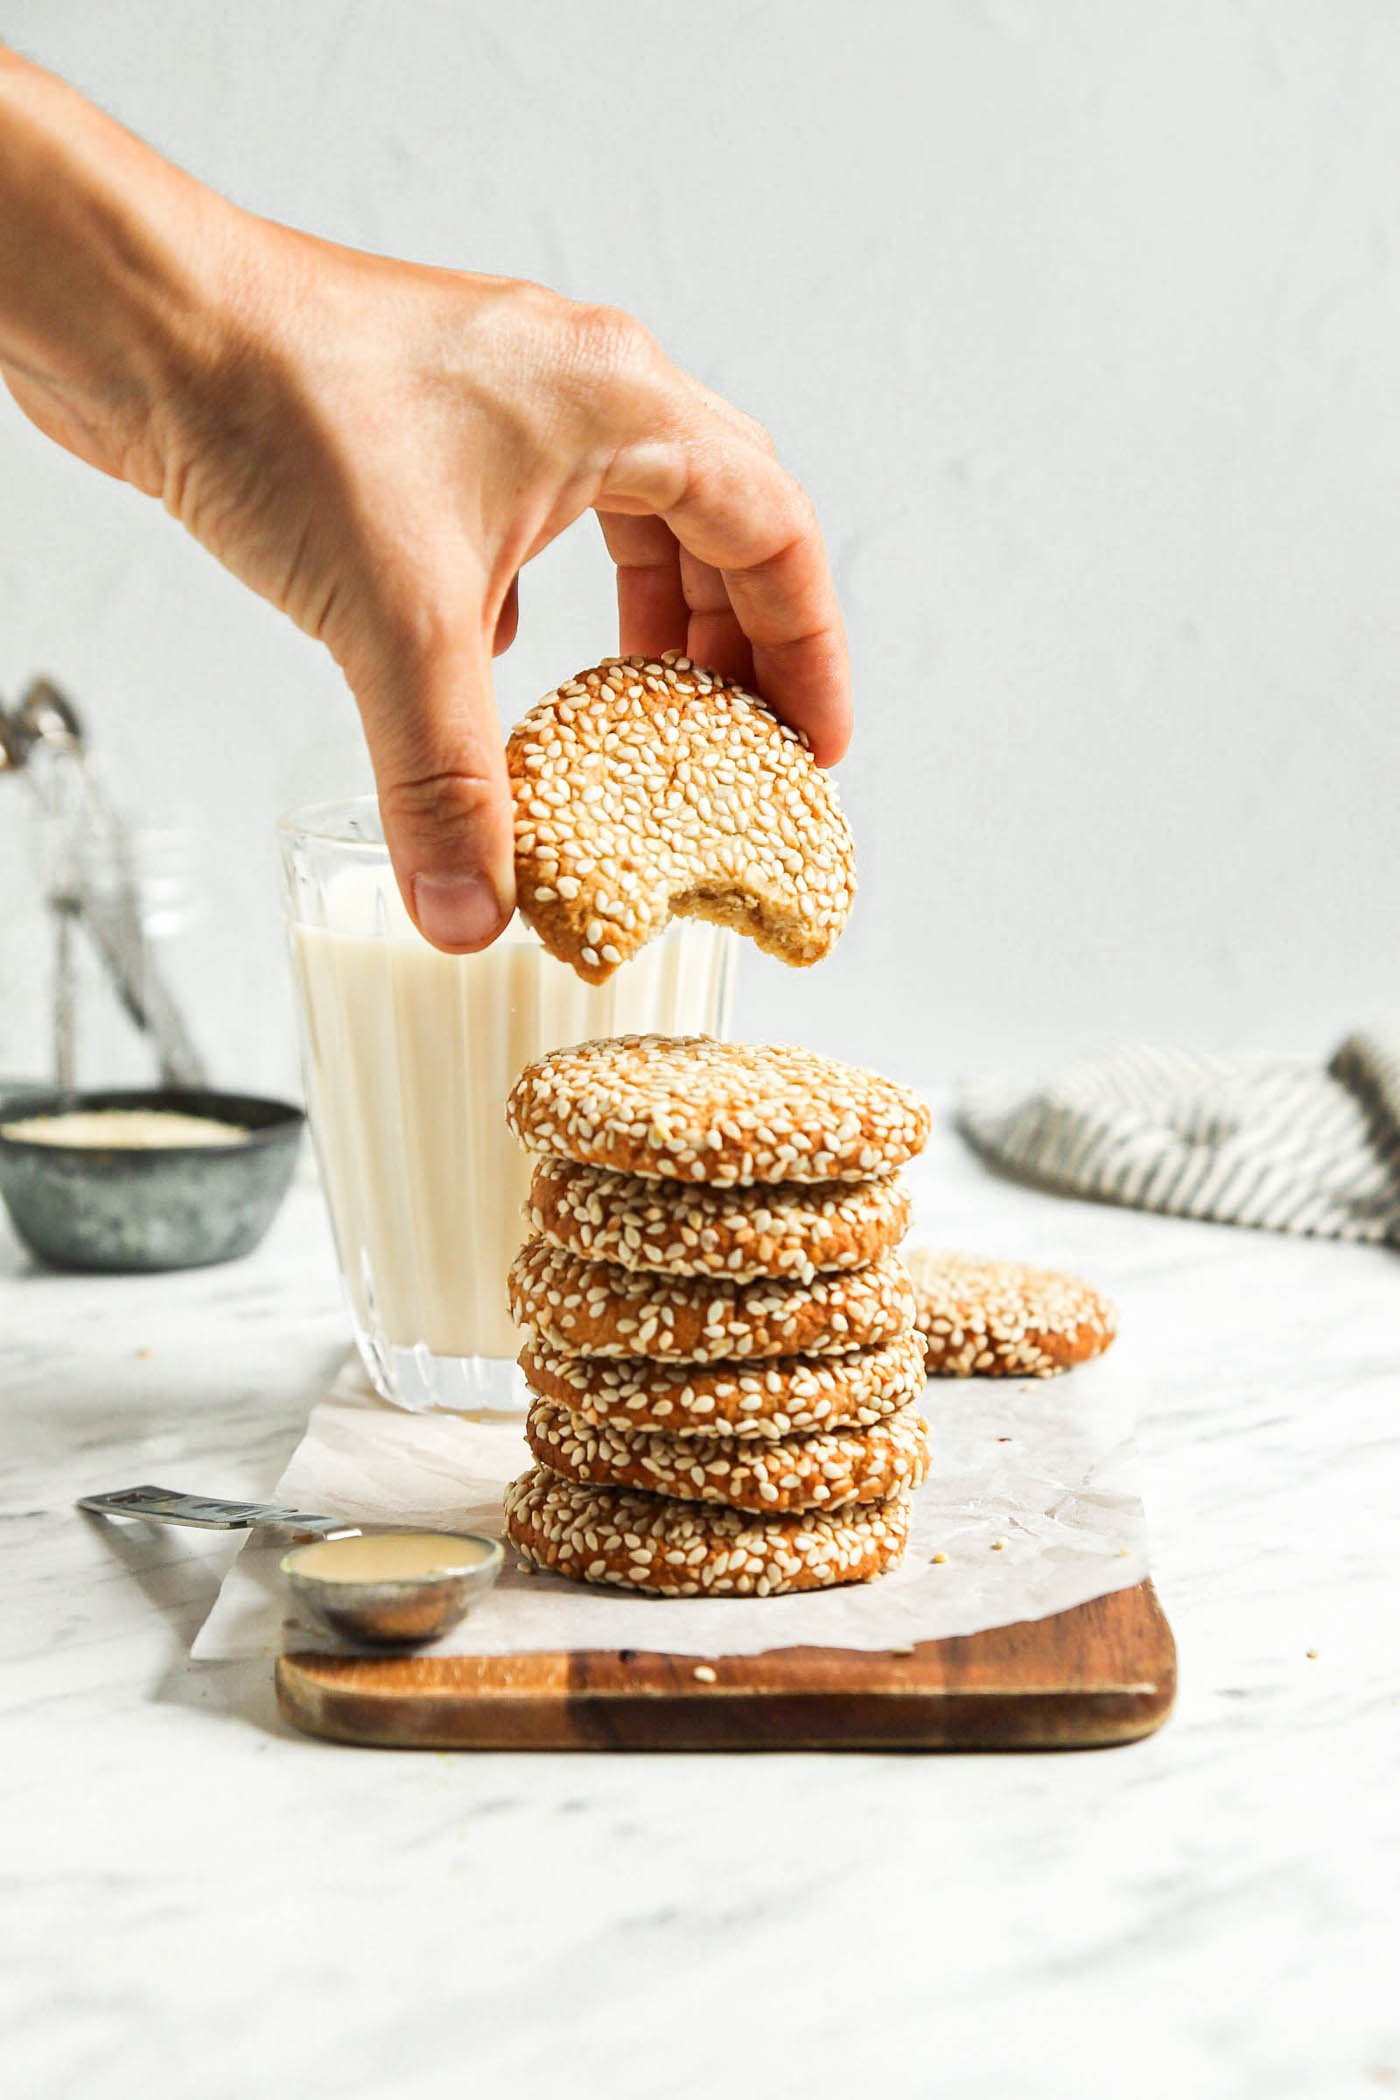 Hand lifting a sesame seed-coated tahini cookie from a stack of cookies on a cutting board.